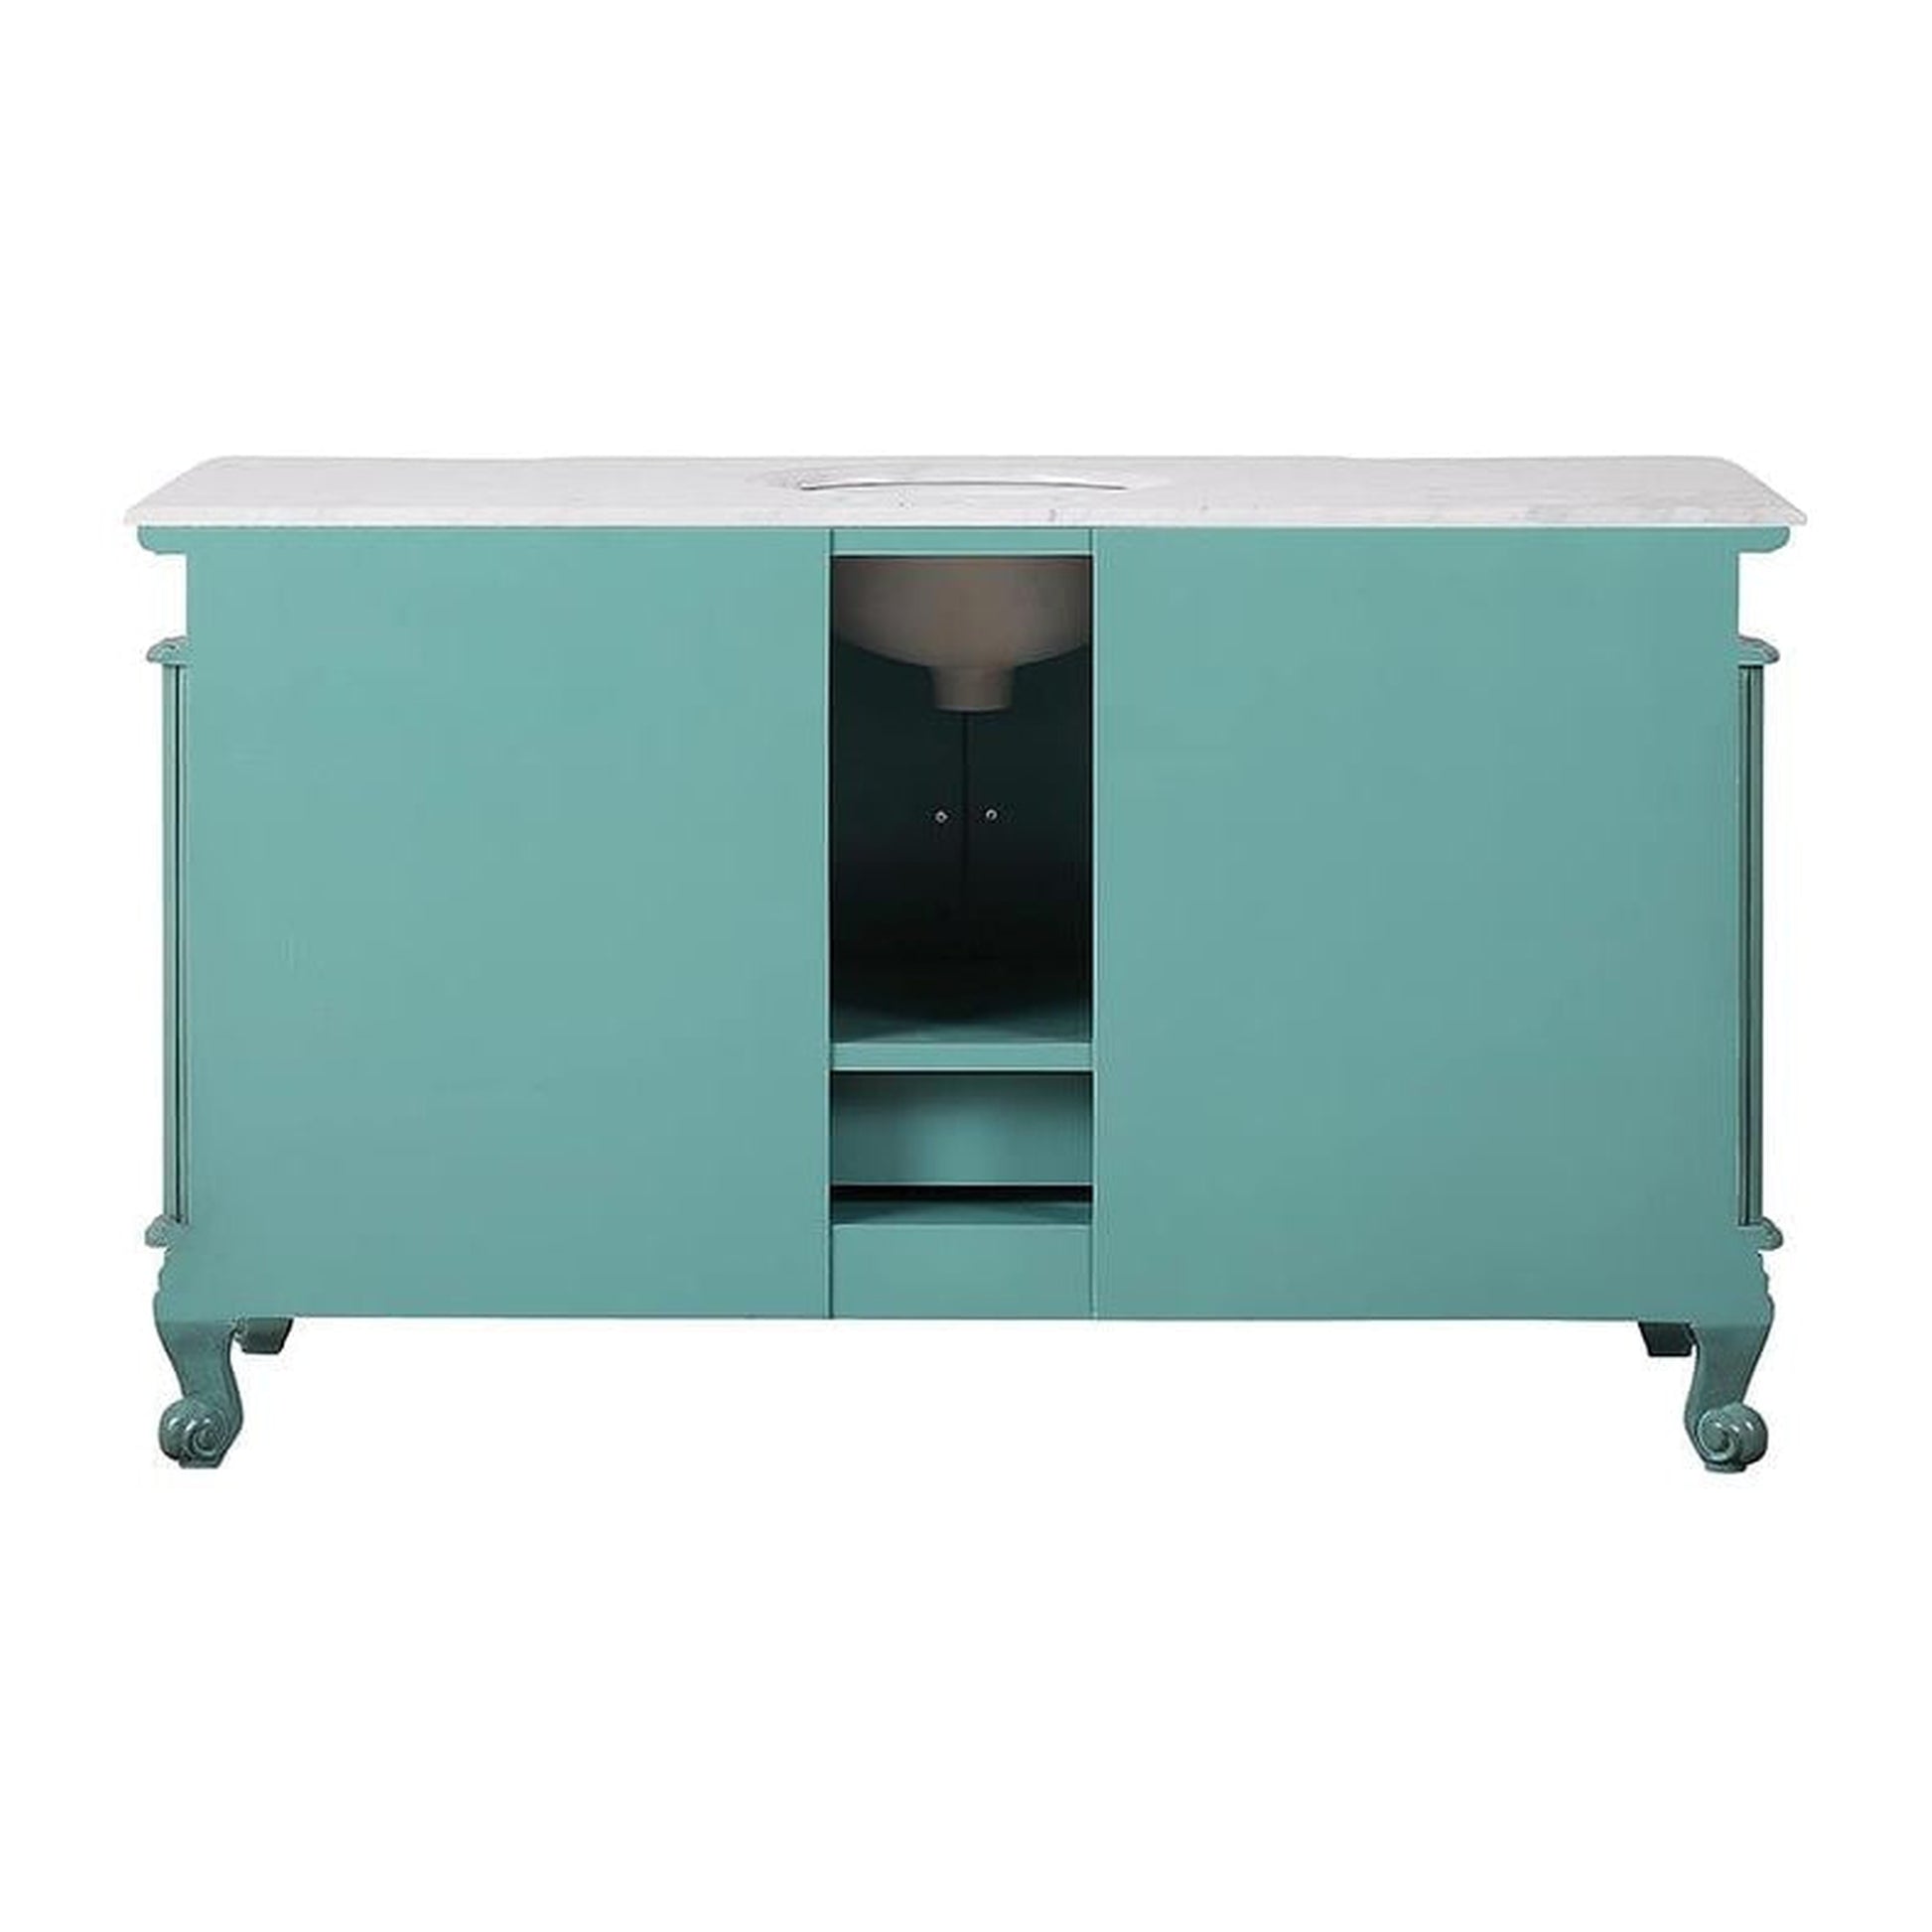 Silkroad Exclusive 60" Single Sink Vintage Green Bathroom Vanity With Carrara White Marble Countertop and White Ceramic Undermount Sink